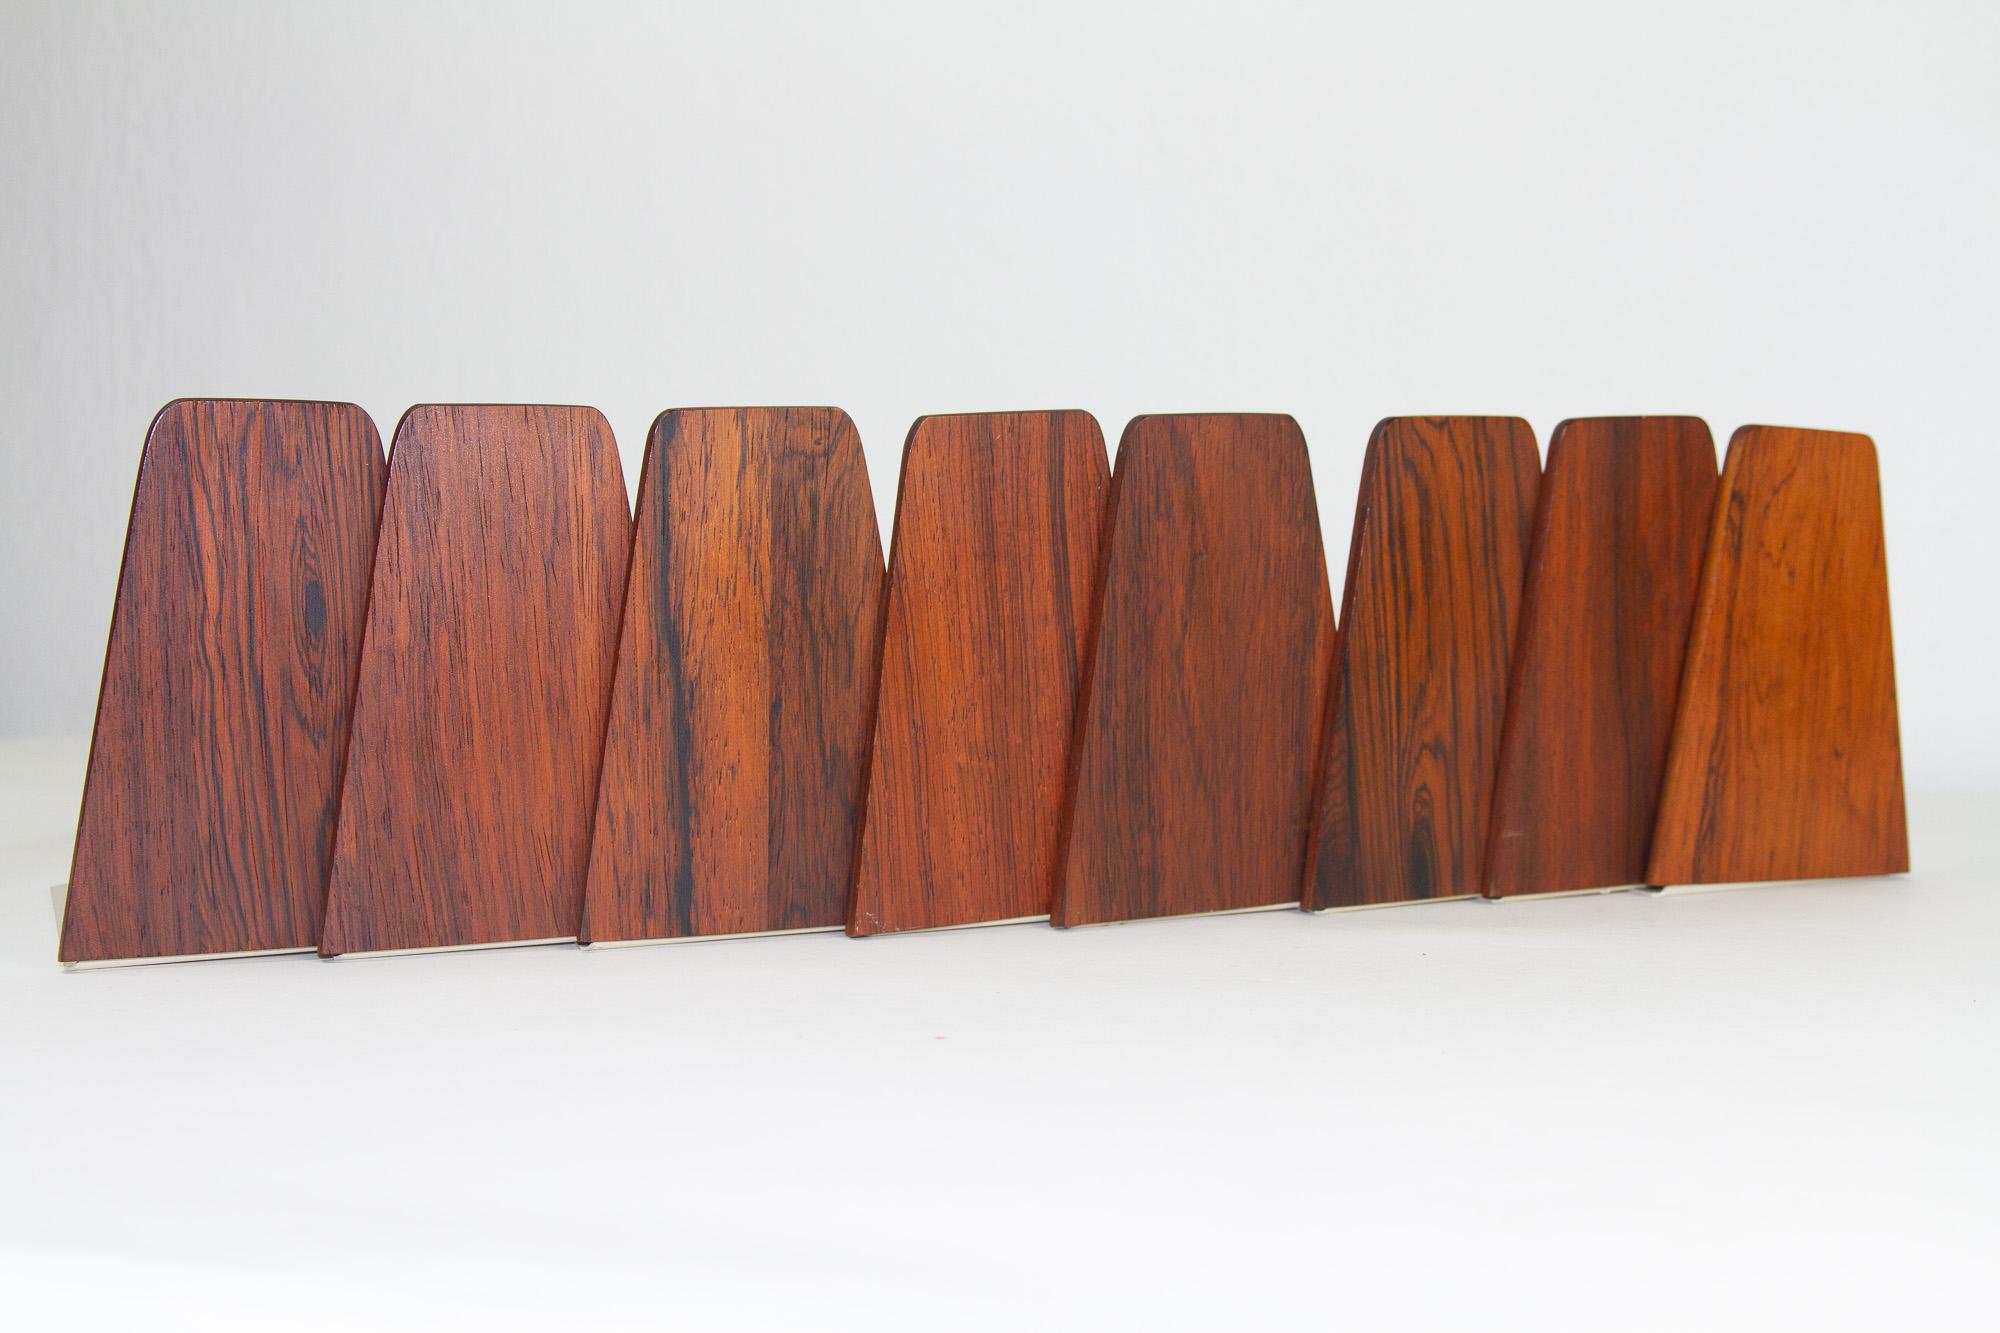 Mid-century bookends by Kai Kristiansen for FM 1960s, set of 8.
Very decorative Danish modern bookends in rosewood and metal designed by Danish designer Kai Kristiansen for Feldballes Møbelfabrik. Made as a supplement to FM Reolen wall unit